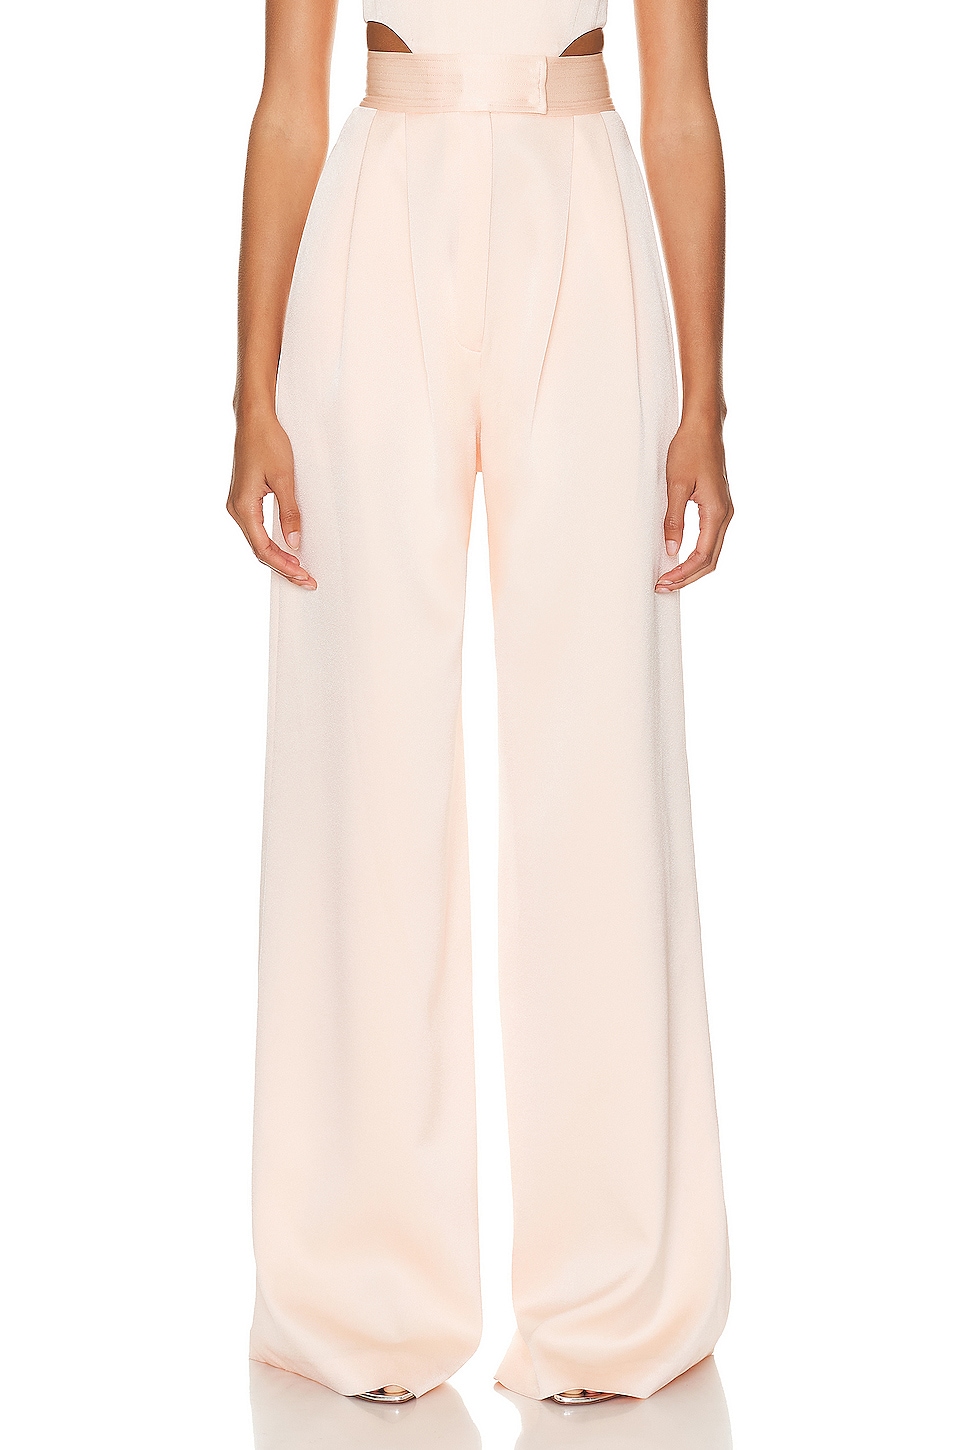 Image 1 of Alex Perry Pleat Trouser in Peach